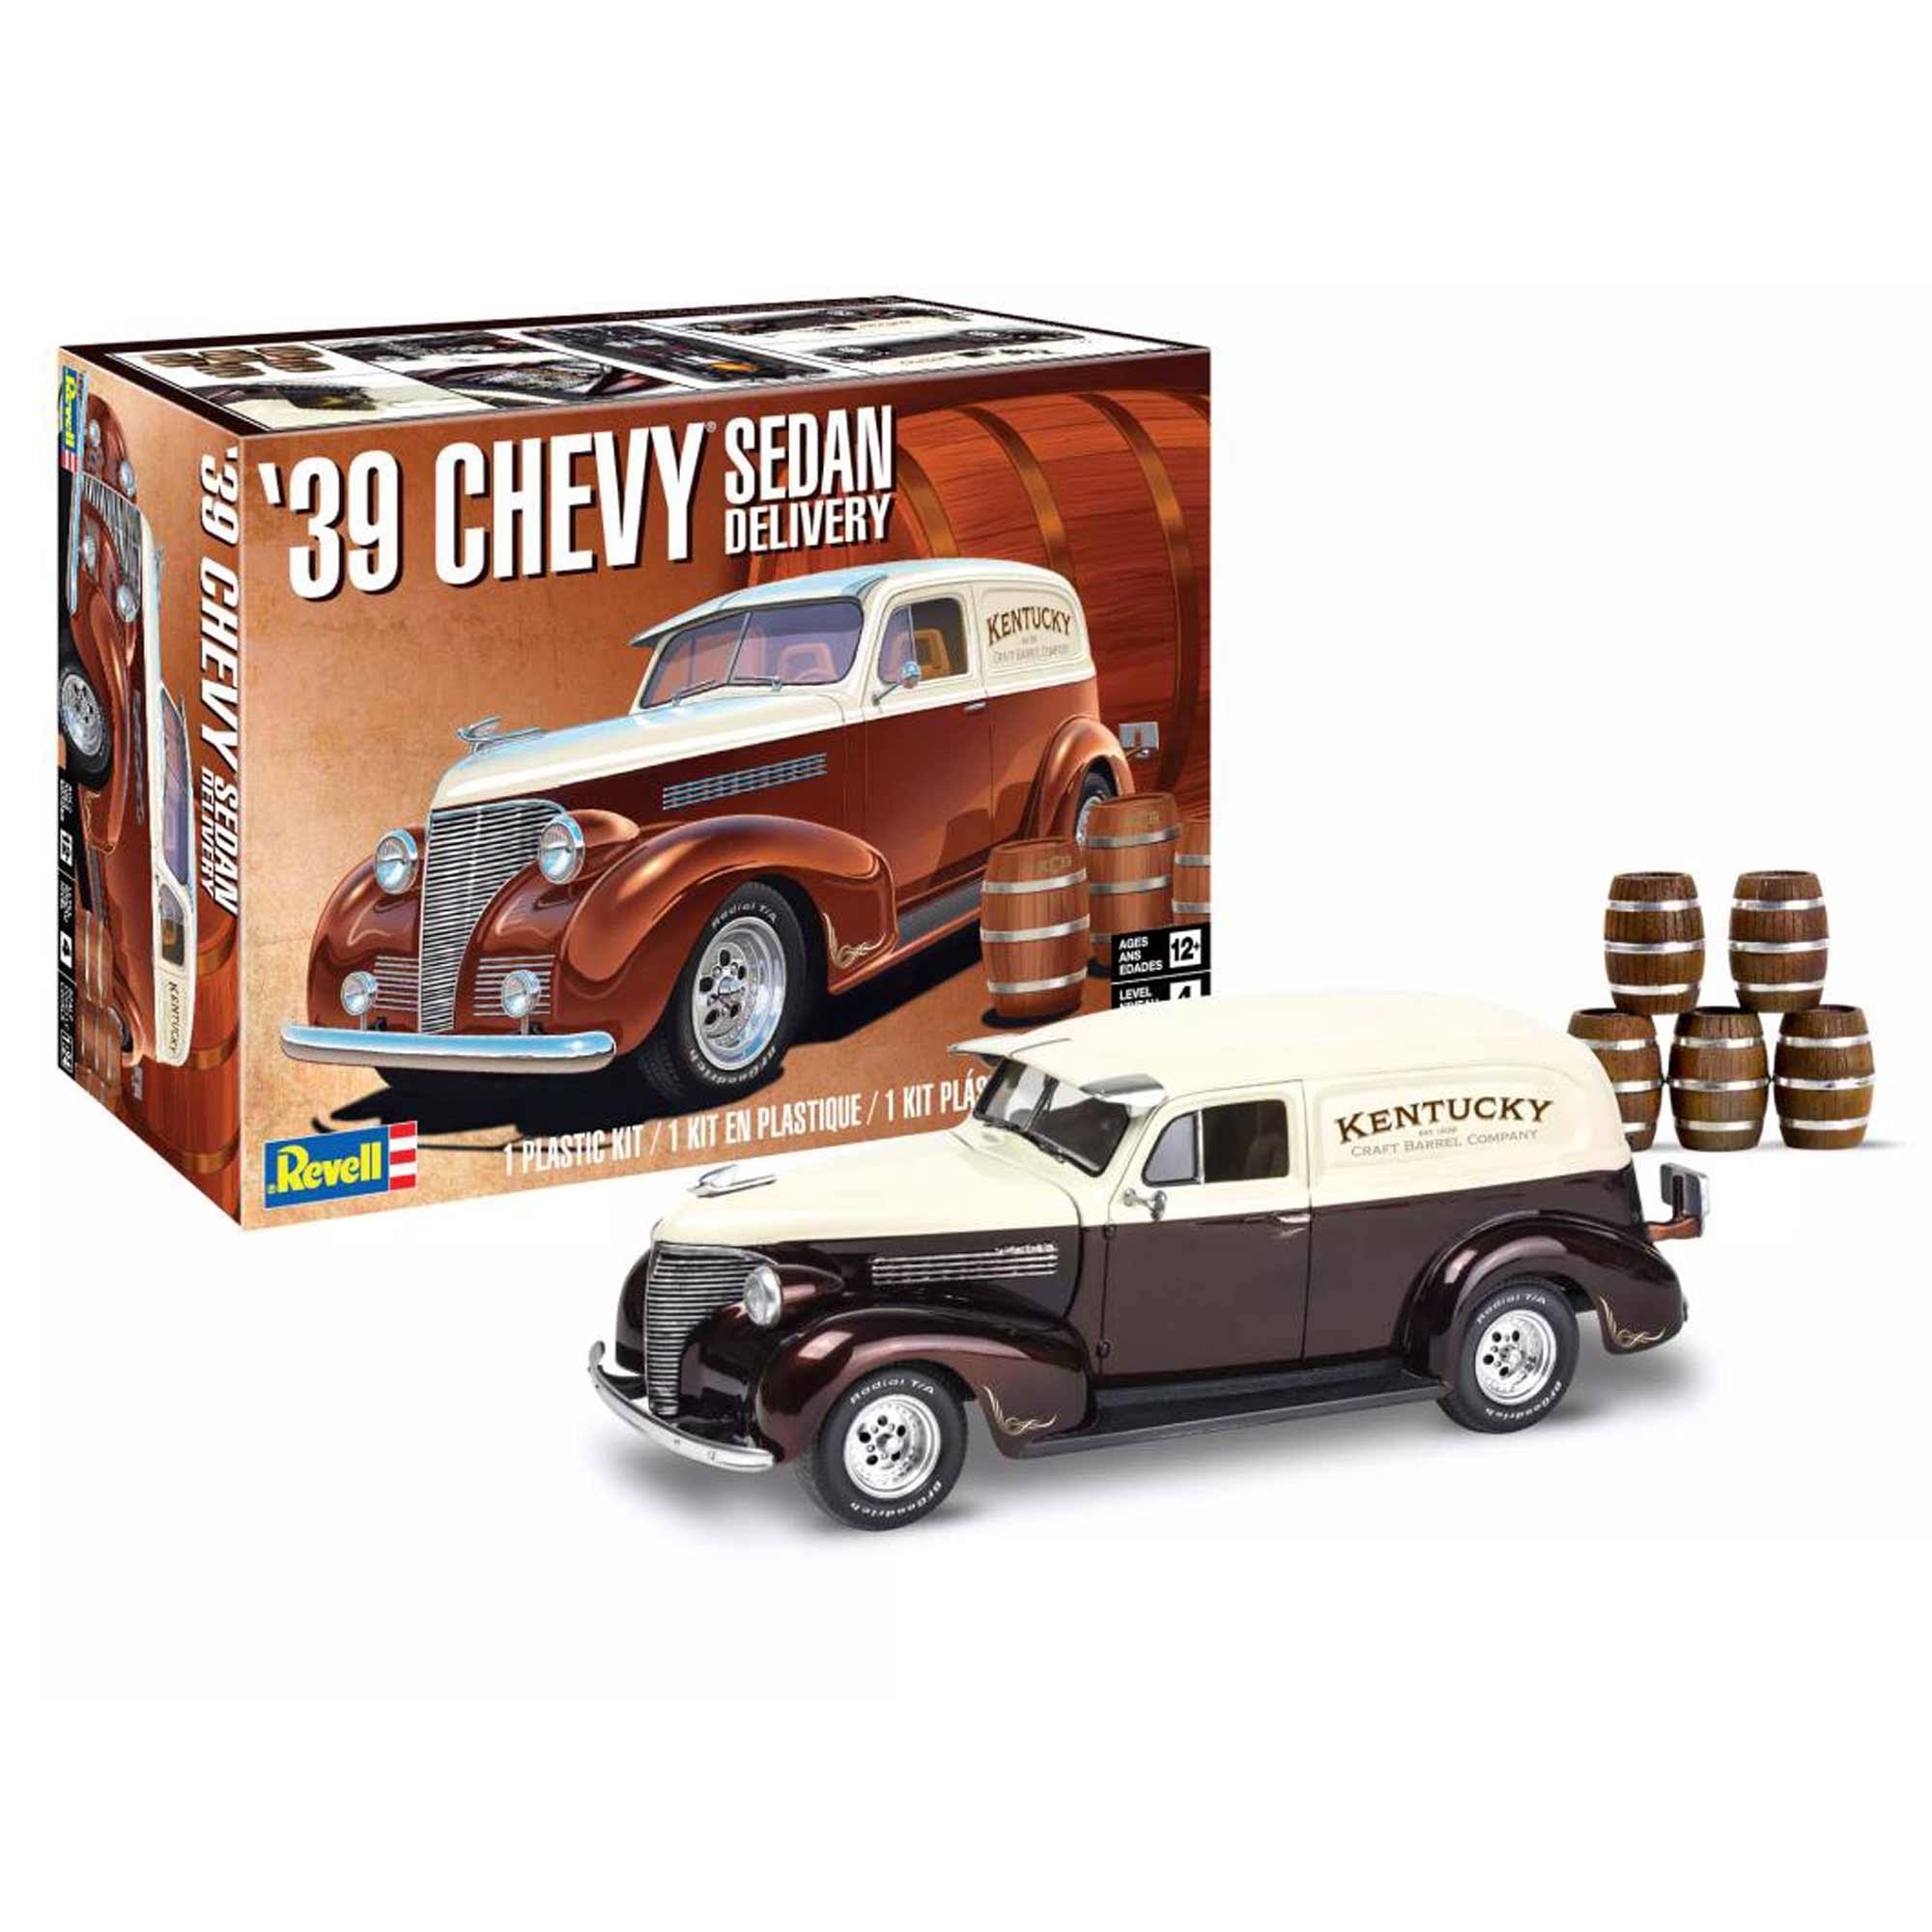 1/24 Scale 1939 Chevy Sedan Delivery Model 4529 - Revell